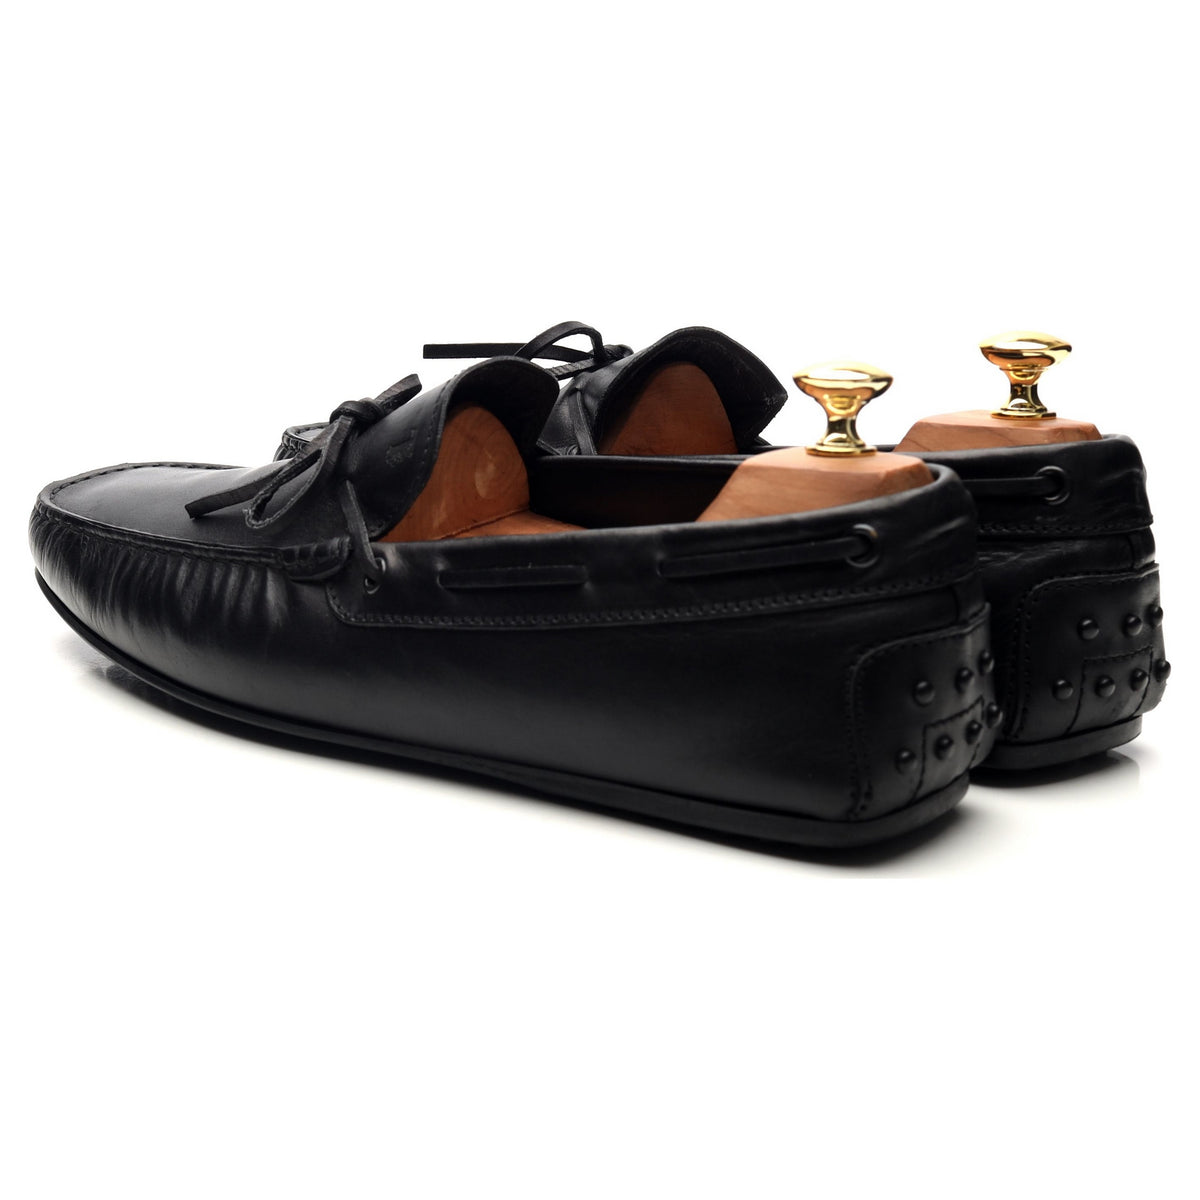 Gommino Black Leather Driving Loafers UK 10